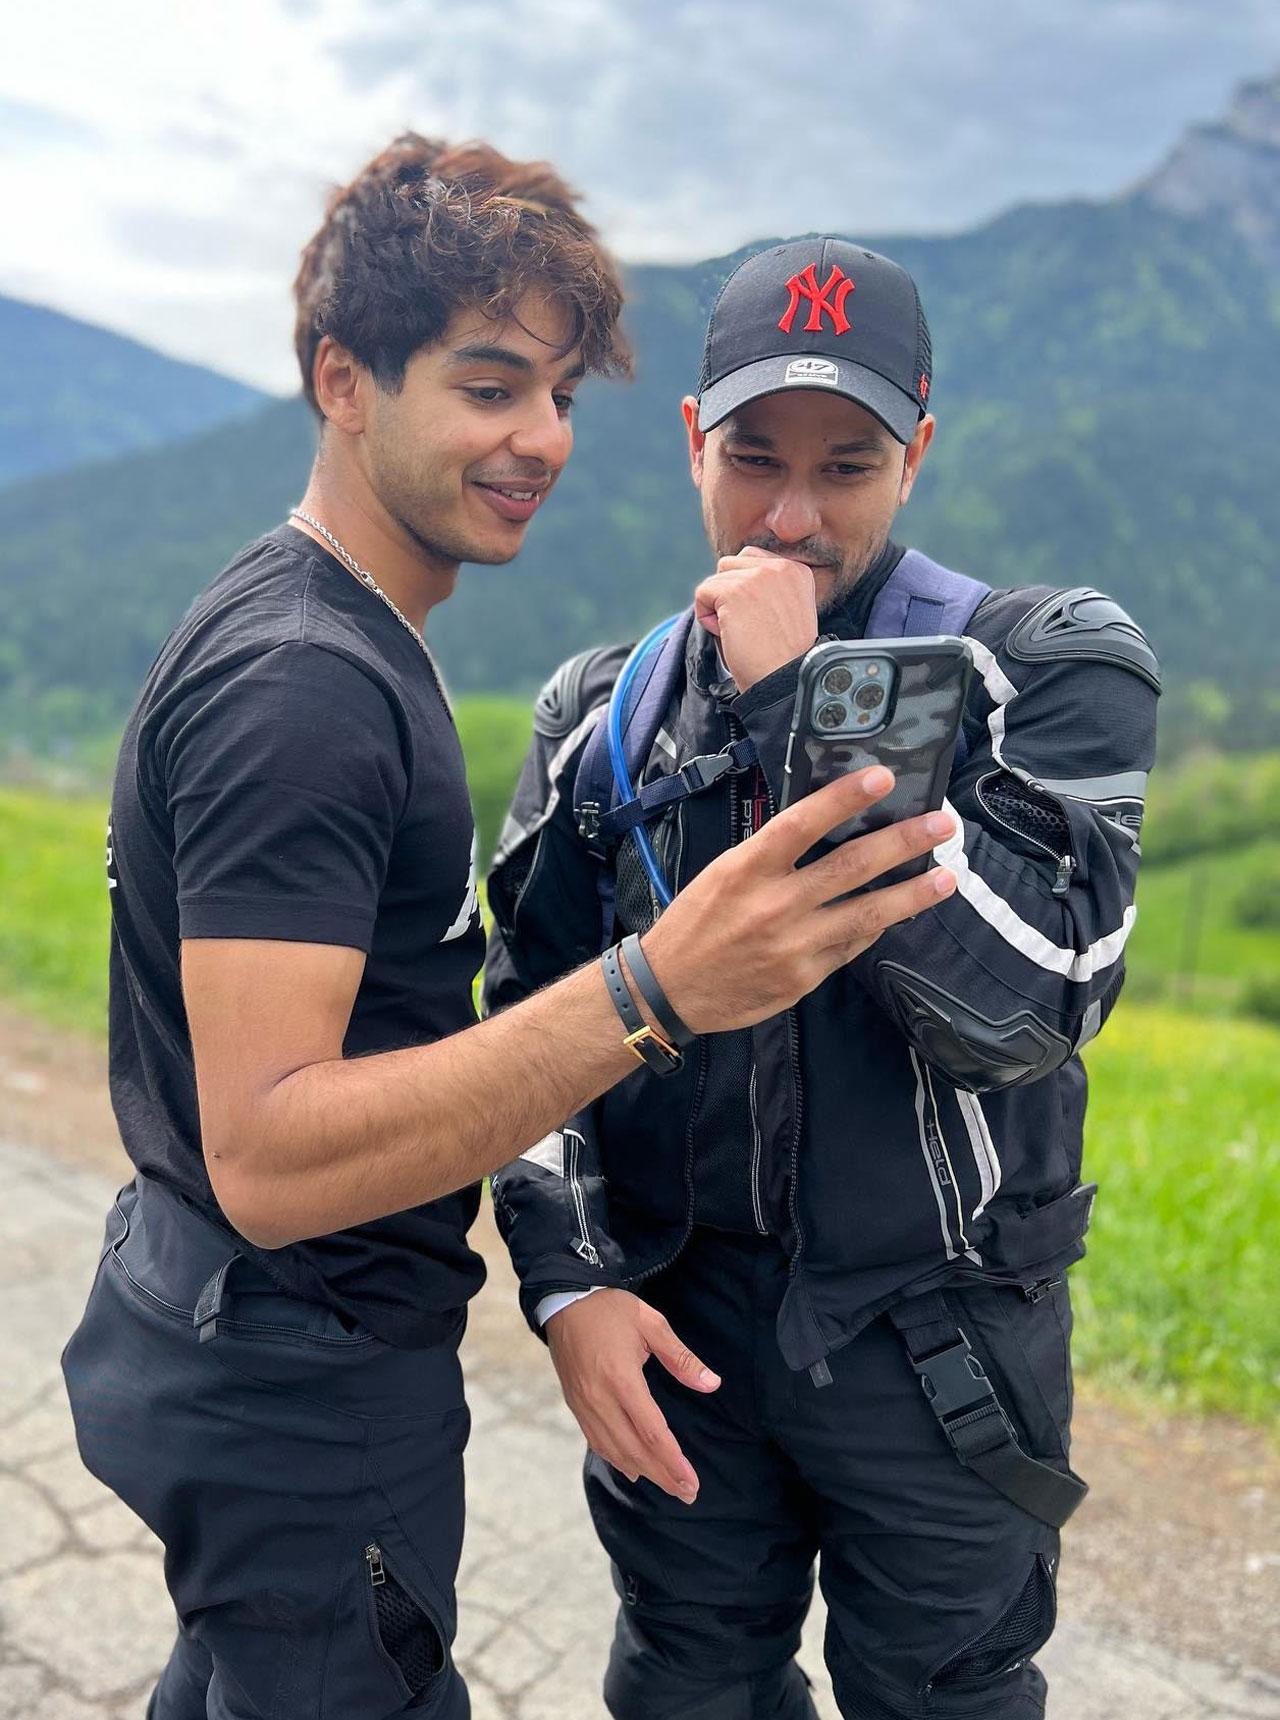 Kunal Kemmu, Ishaan Khatter were recently on a trip to Europe for something exciting and whacky and here is the duo clicking a selfie against the backdrop of the stunning locales.